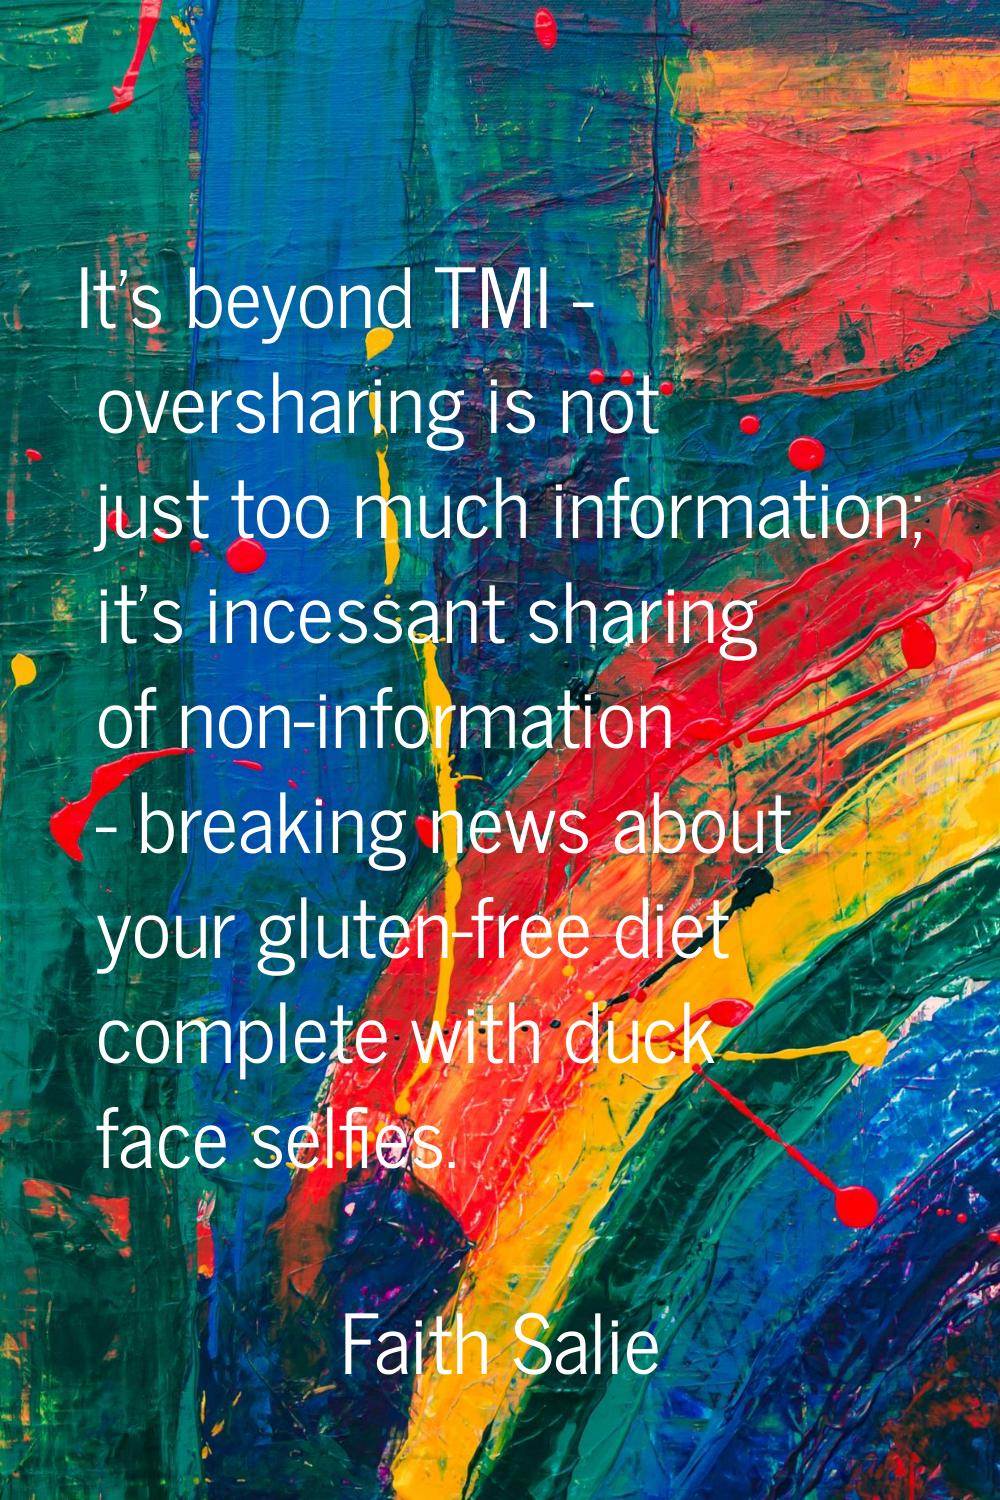 It's beyond TMI - oversharing is not just too much information; it's incessant sharing of non-infor